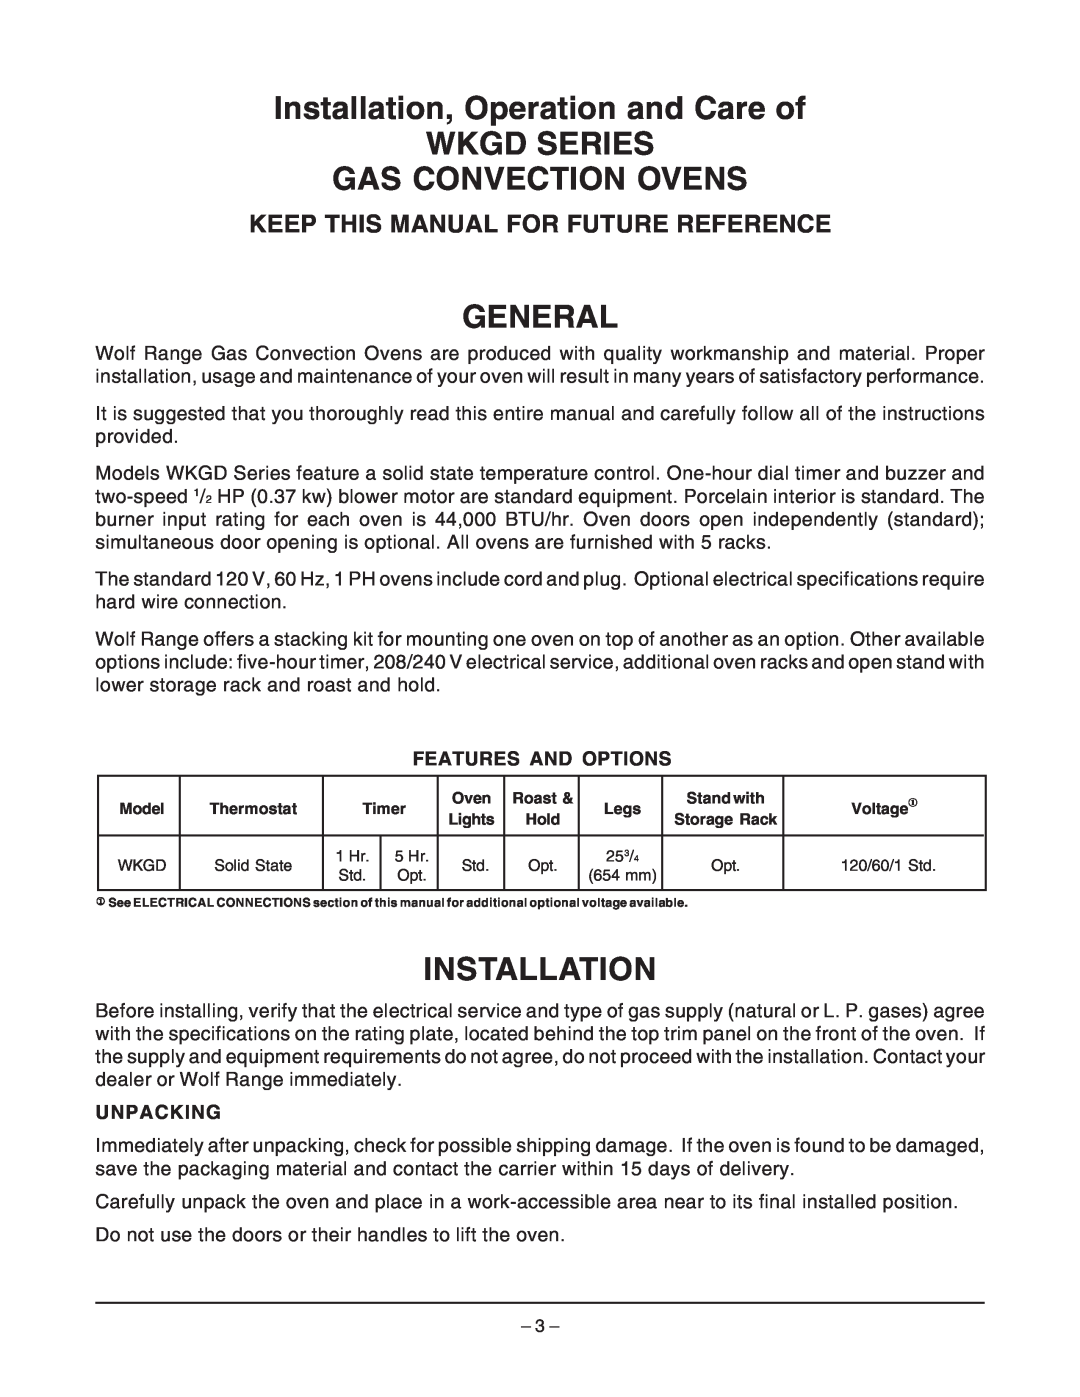 Wolf Appliance Company WKGD ML-126621 Installation, Operation and Care of WKGD SERIES GAS CONVECTION OVENS, General 